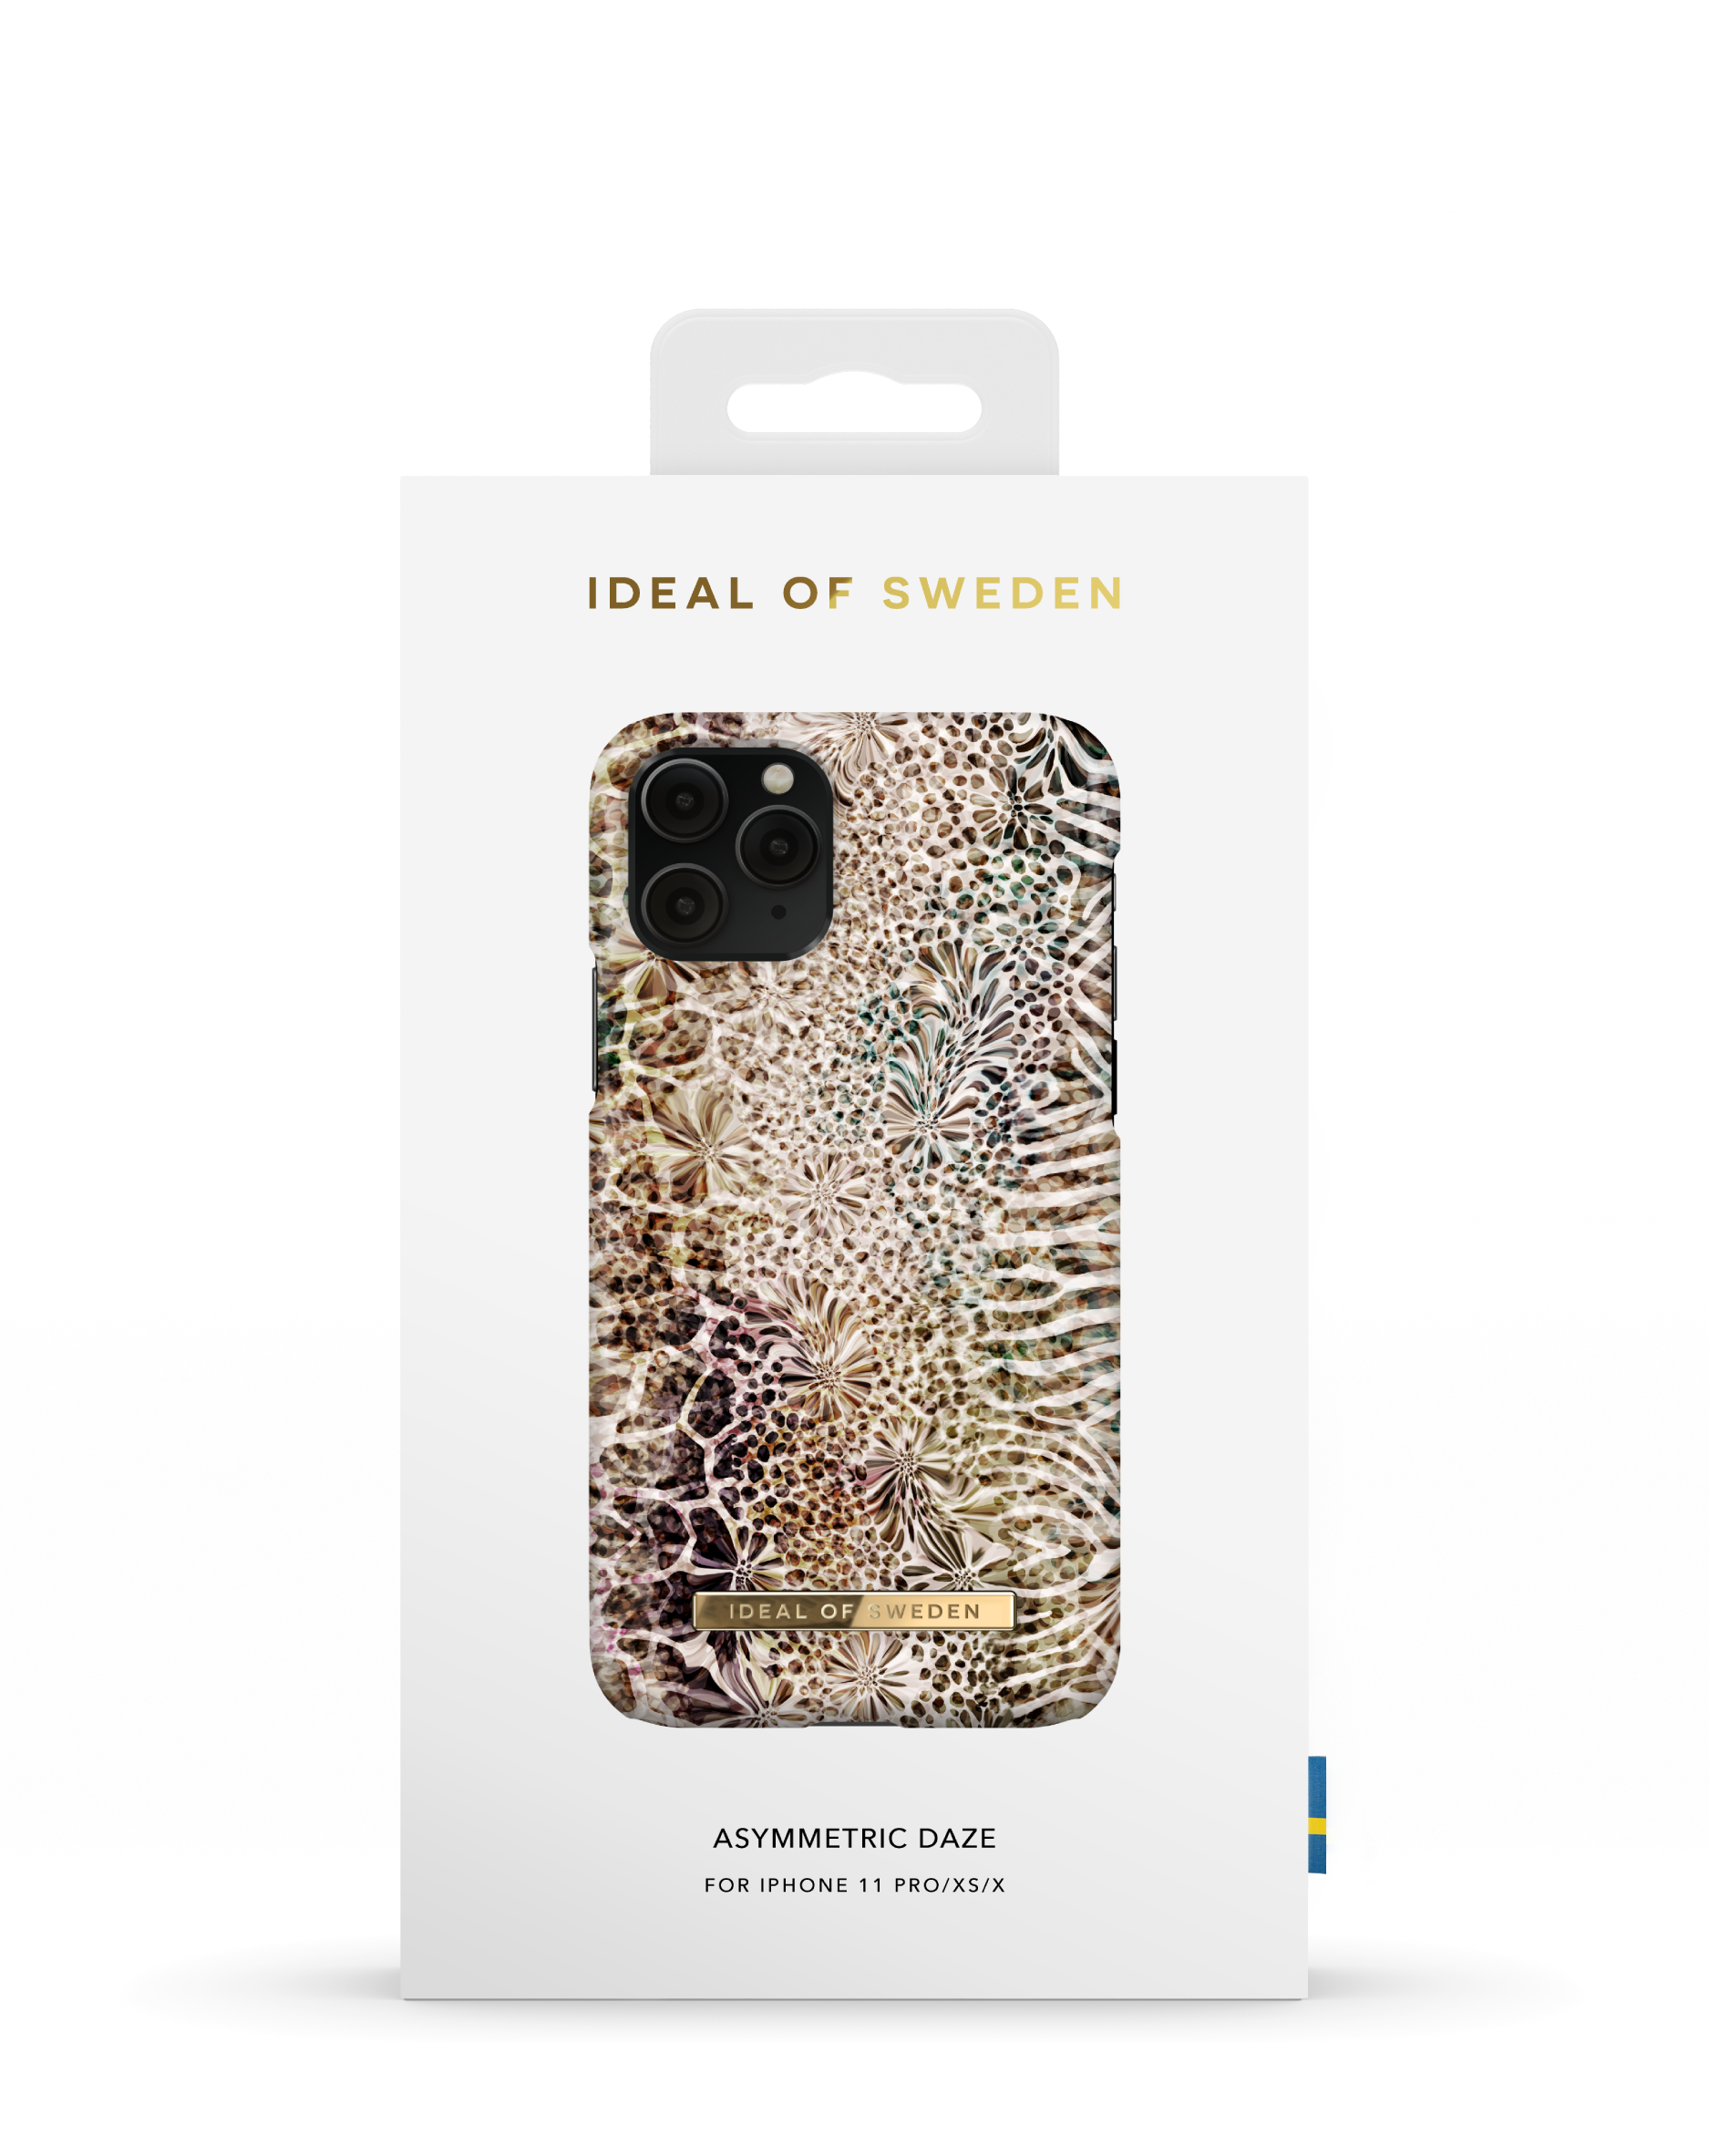 iPhone Apple IDEAL iPhone Backcover, iPhone IDFCSS20-I1958-198, Pro, Daze SWEDEN Apple Apple, XS, X, 11 Apple Assymetric OF